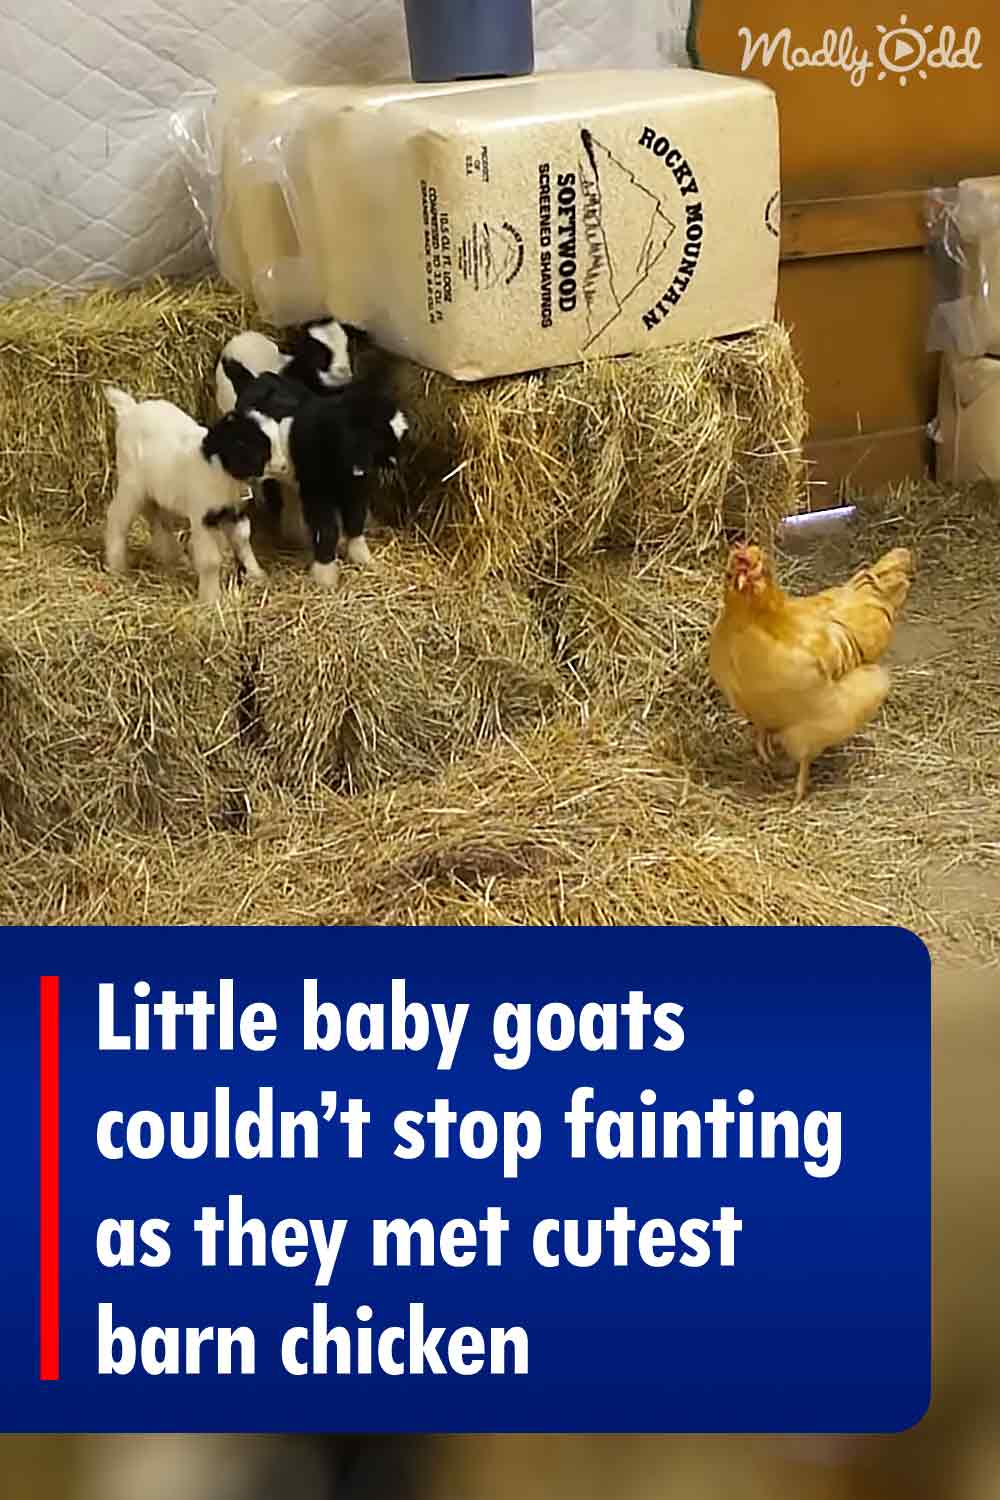 Little baby goats couldn’t stop fainting as they met cutest barn chicken